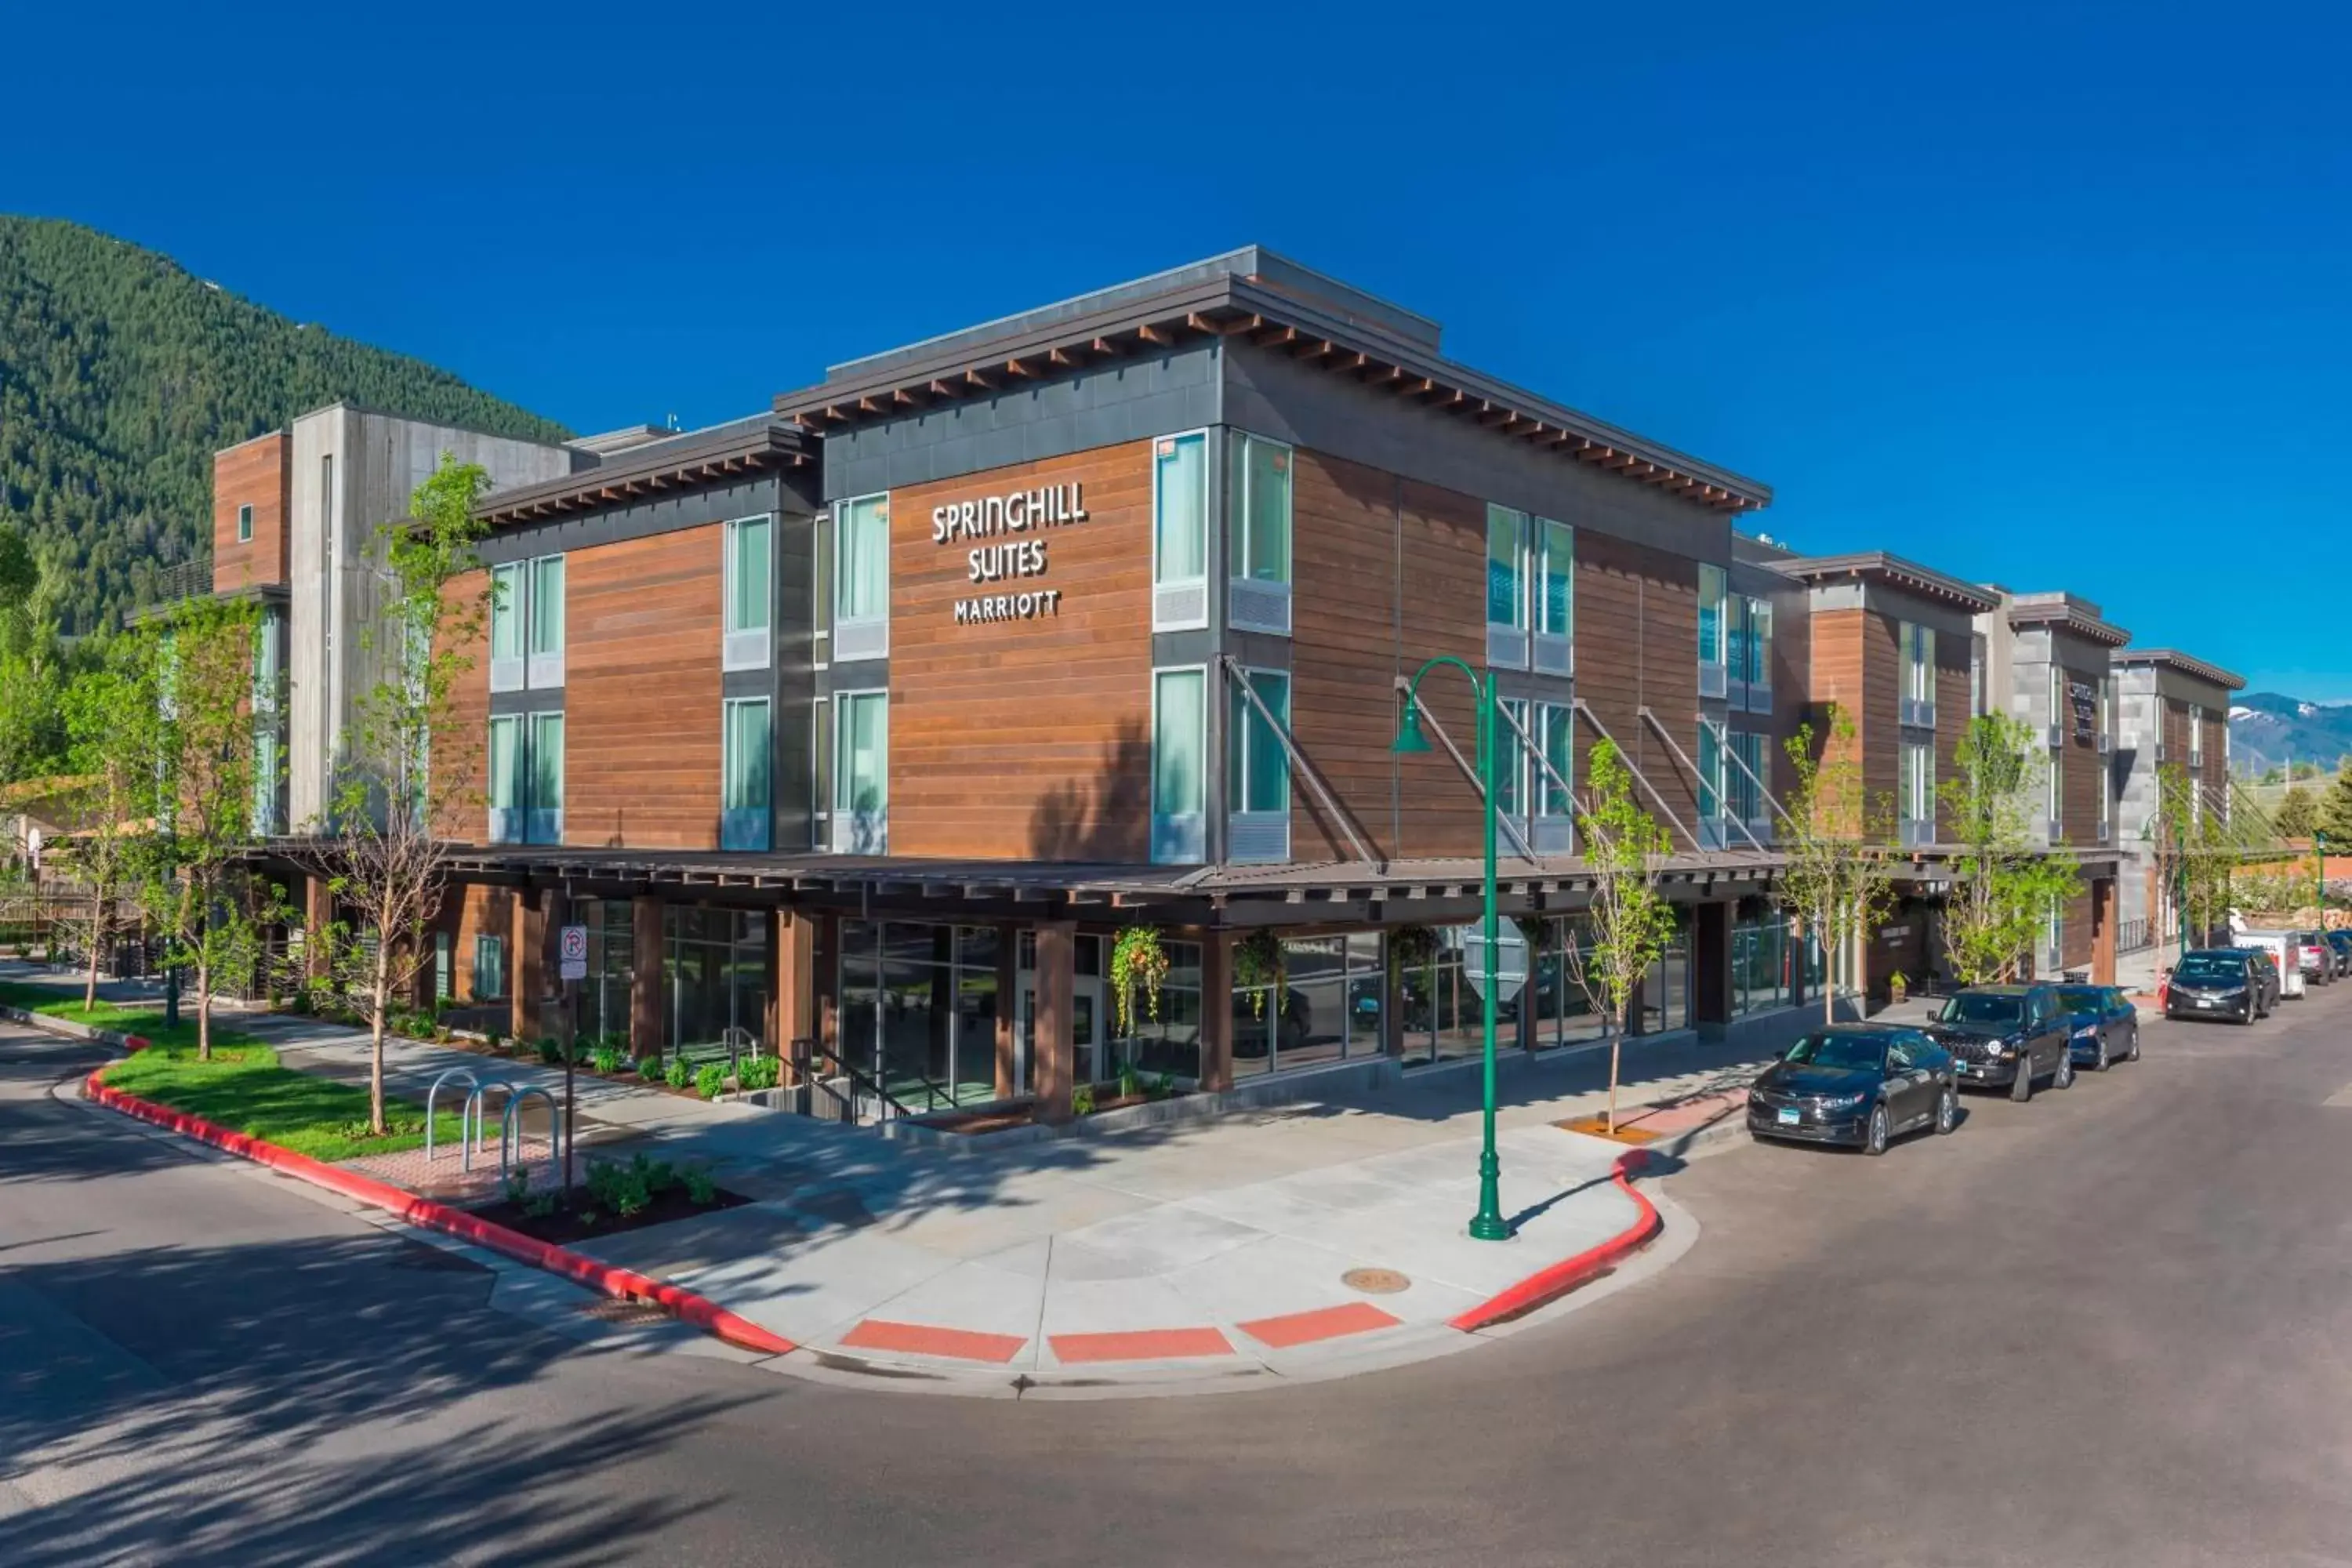 Property Building in SpringHill Suites by Marriott Jackson Hole